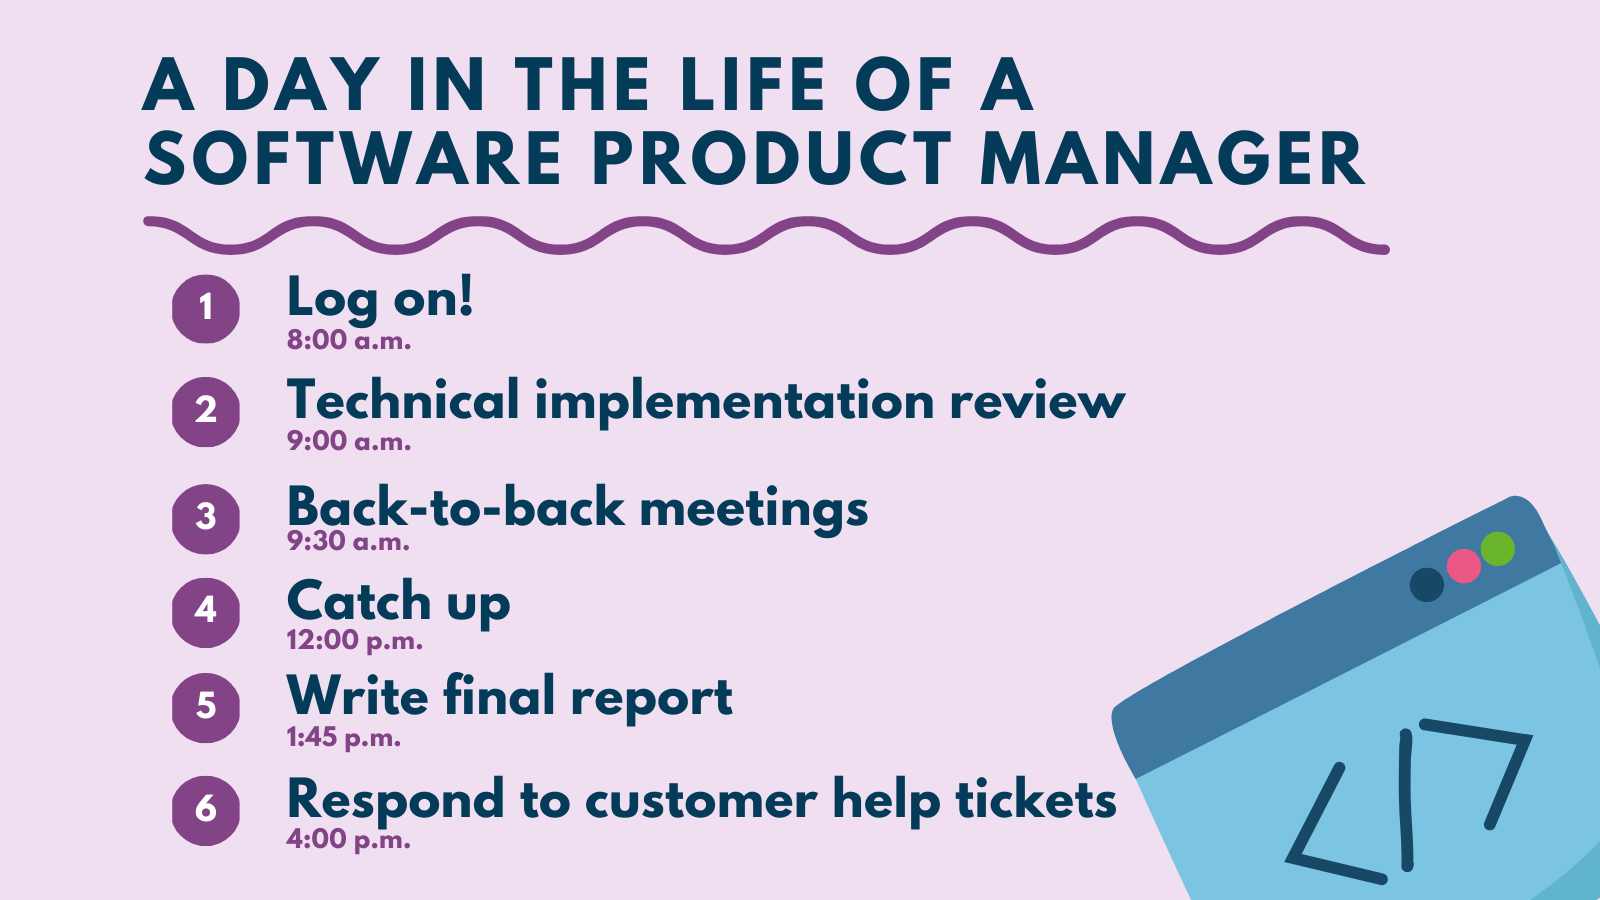 A day in the life of a software product manager infographic